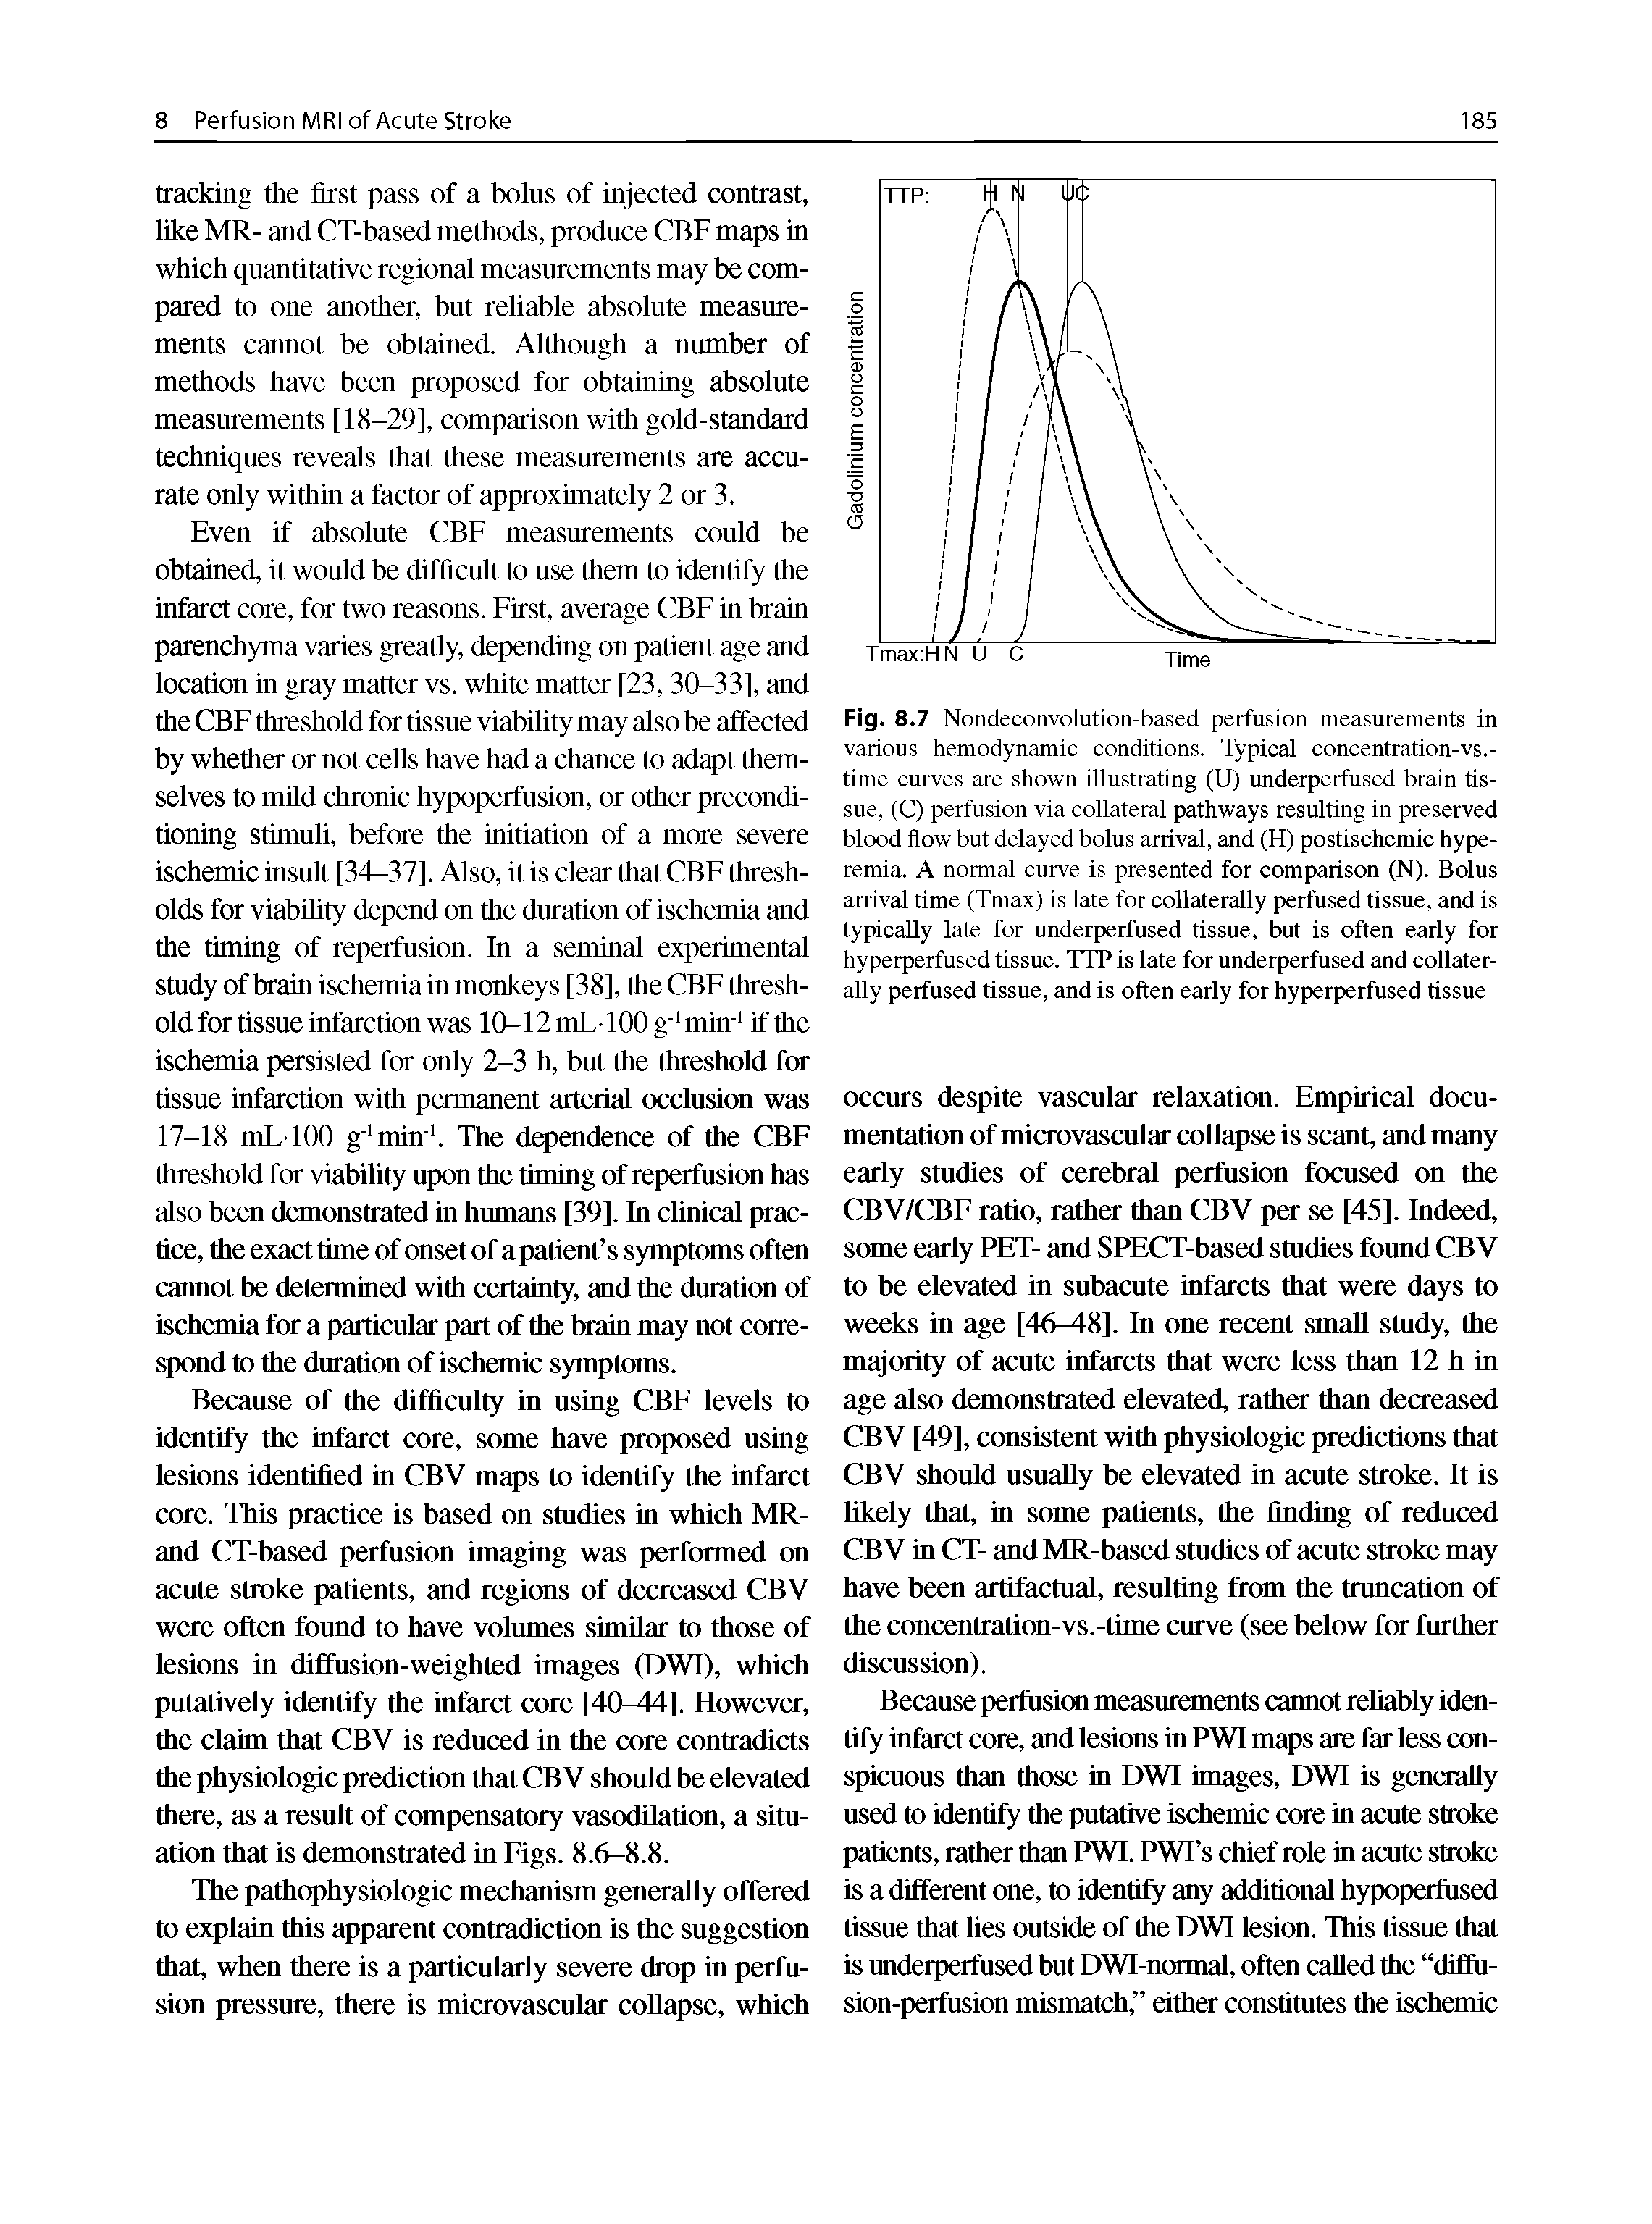 Fig. 8.7 Nondeconvolution-based perfusion measurements in various hemodynamic conditions. Typical concentration-vs.-time curves are shown illustrating (U) underperfused brain tissue, (C) perfusion via collateral pathways resulting in preserved blood flow but delayed bolus arrival, and (H) postischemic hyperemia. A normal curve is presented for comparison (N). Bolus arrival time (Tmax) is late for collaterally perfused tissue, and is typically late for underperfused tissue, but is often early for hyperperfused tissue. TTP is late for underperfused and collaterally perfused tissue, and is often early for hyperperfused tissue...